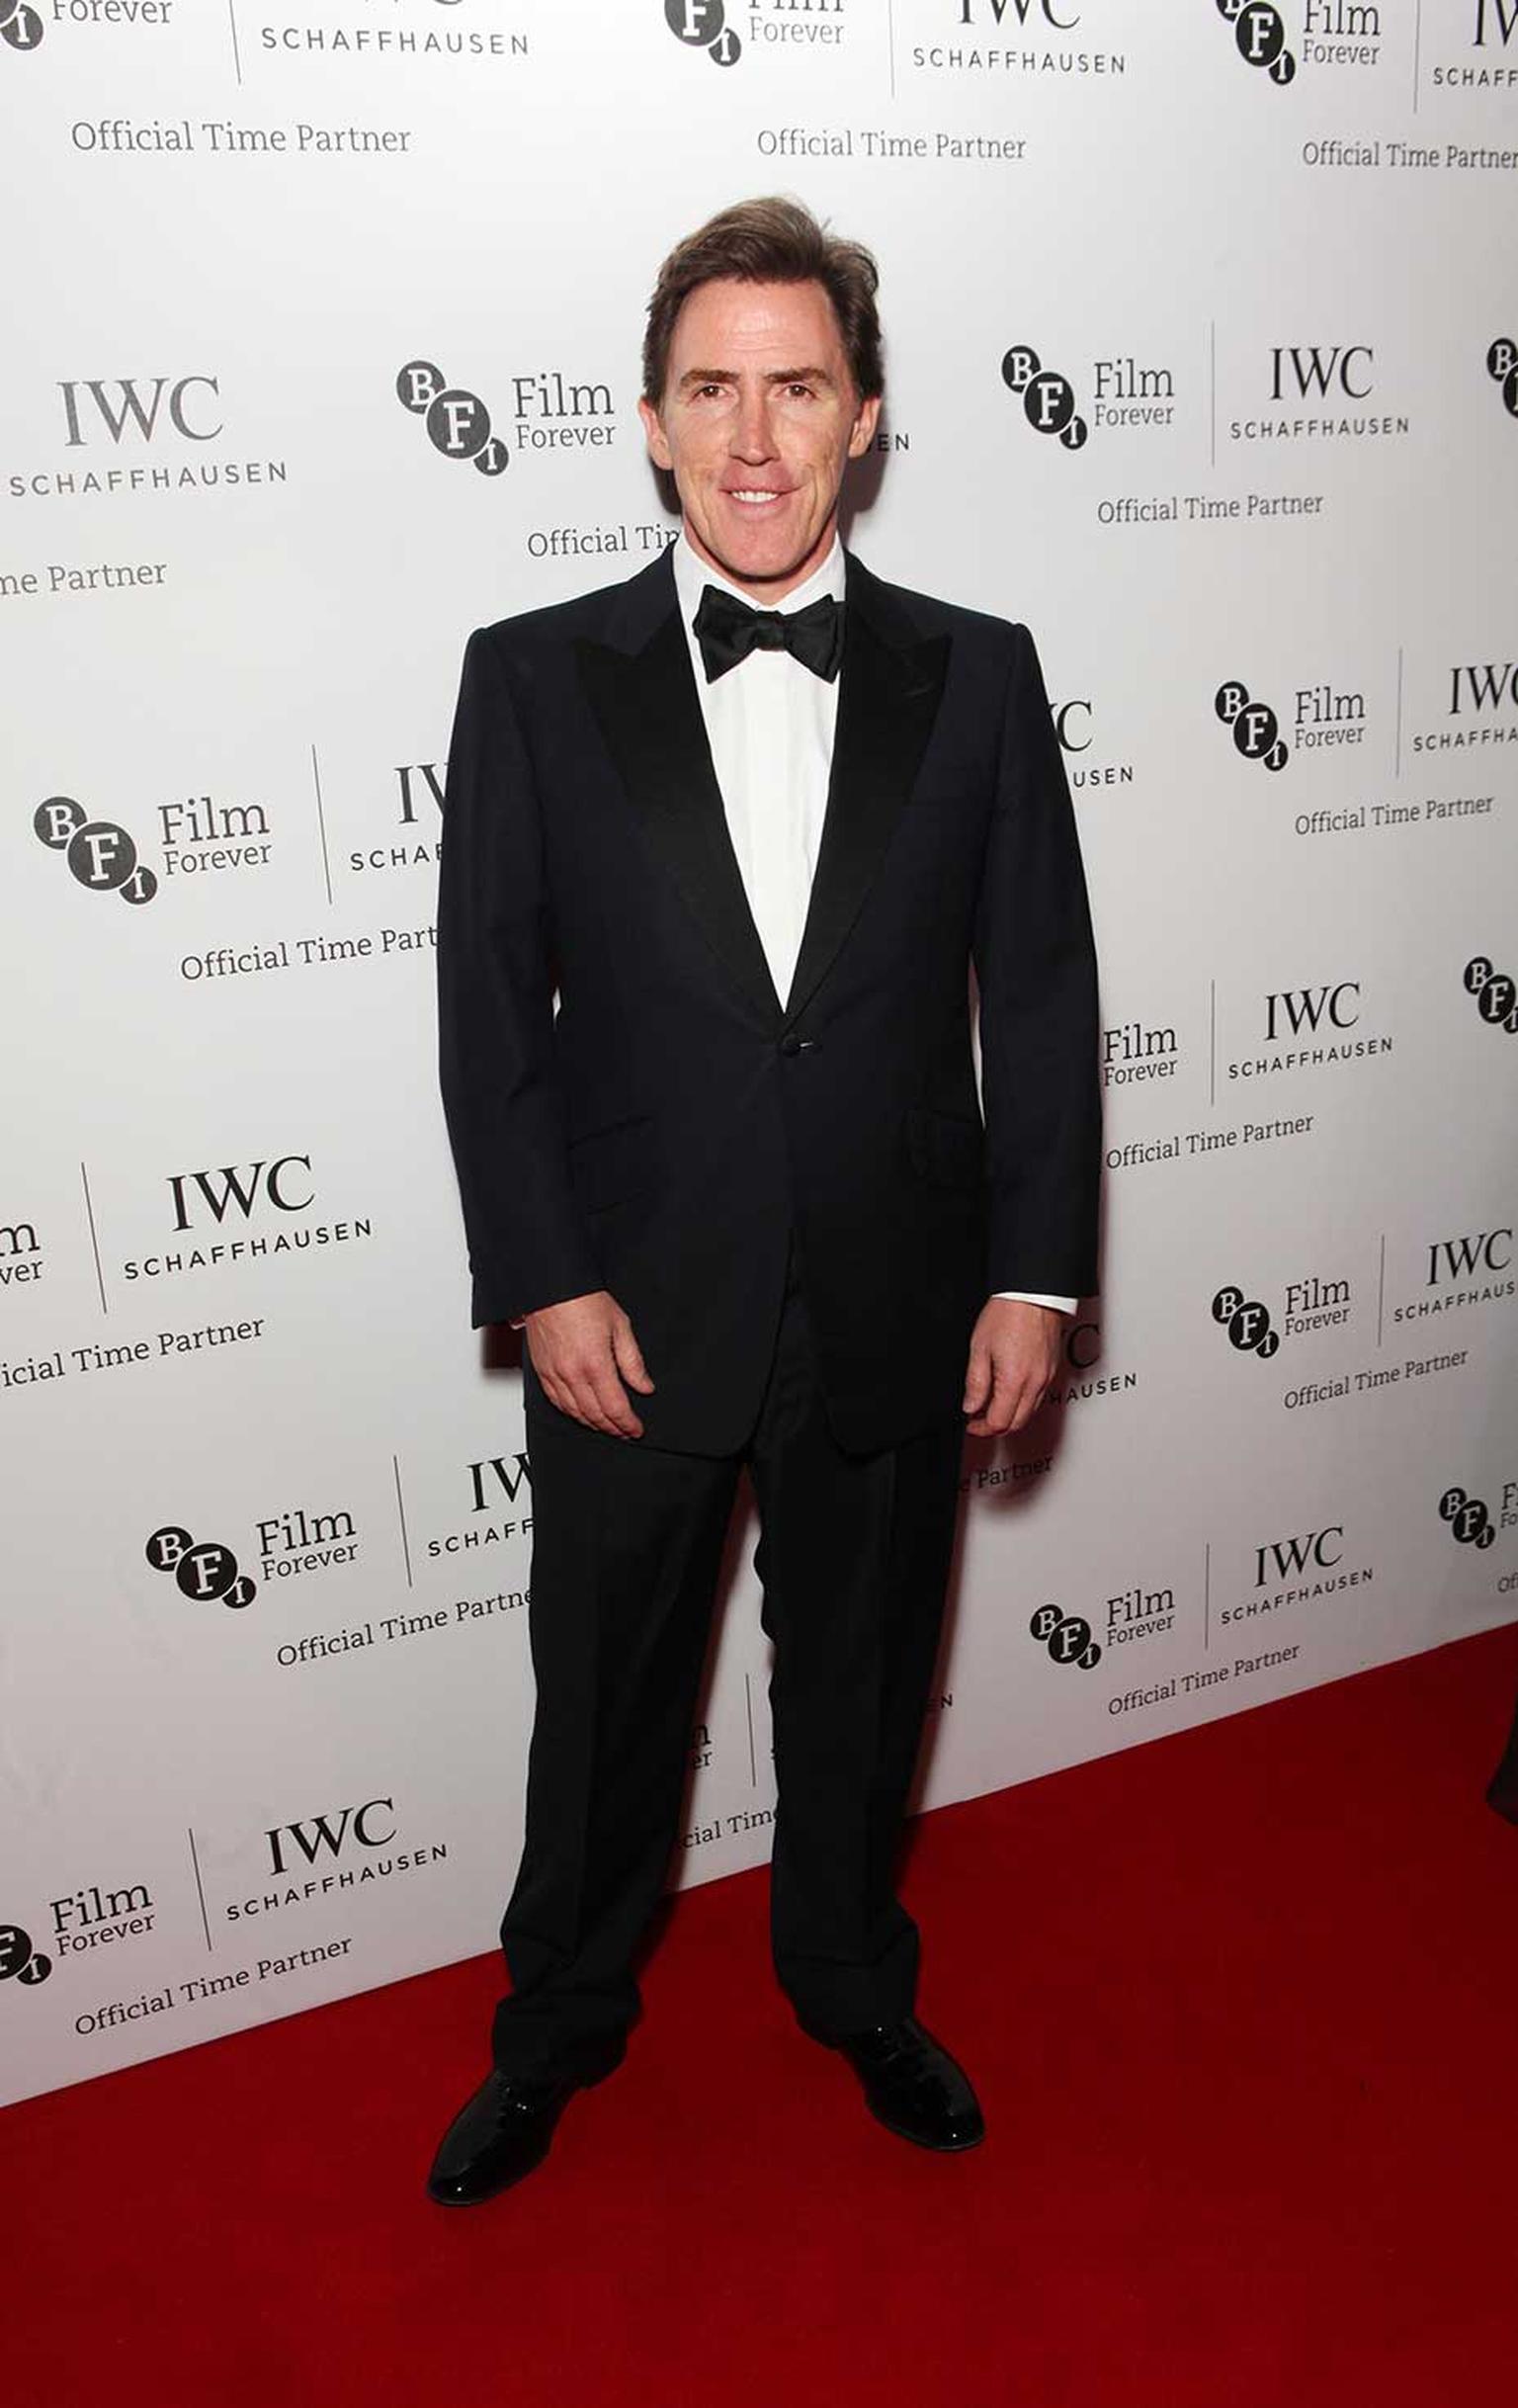 British comedian Rob Brydon, who sang and joked throughout the IWC Gala Dinner, led the entertainment. Image by: IWC/David M. Benett/Getty Images